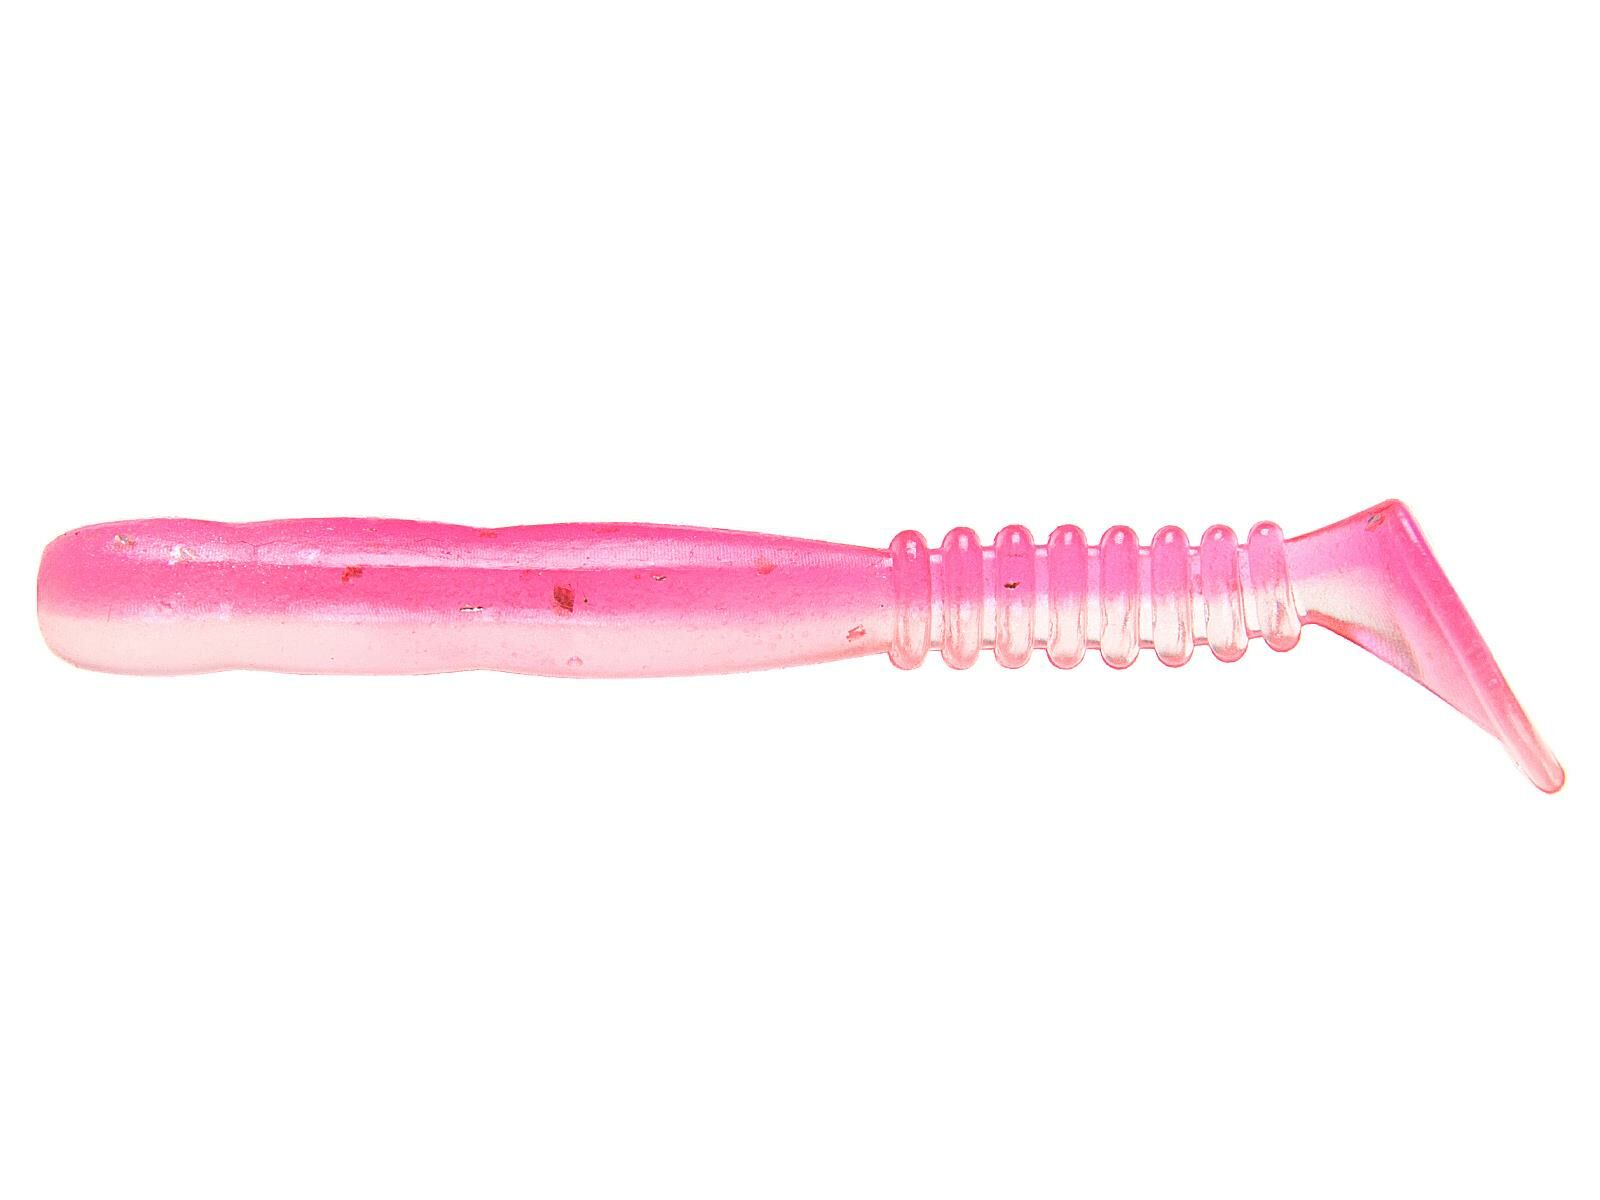 2" Rockvibe Shad - Clear Pink